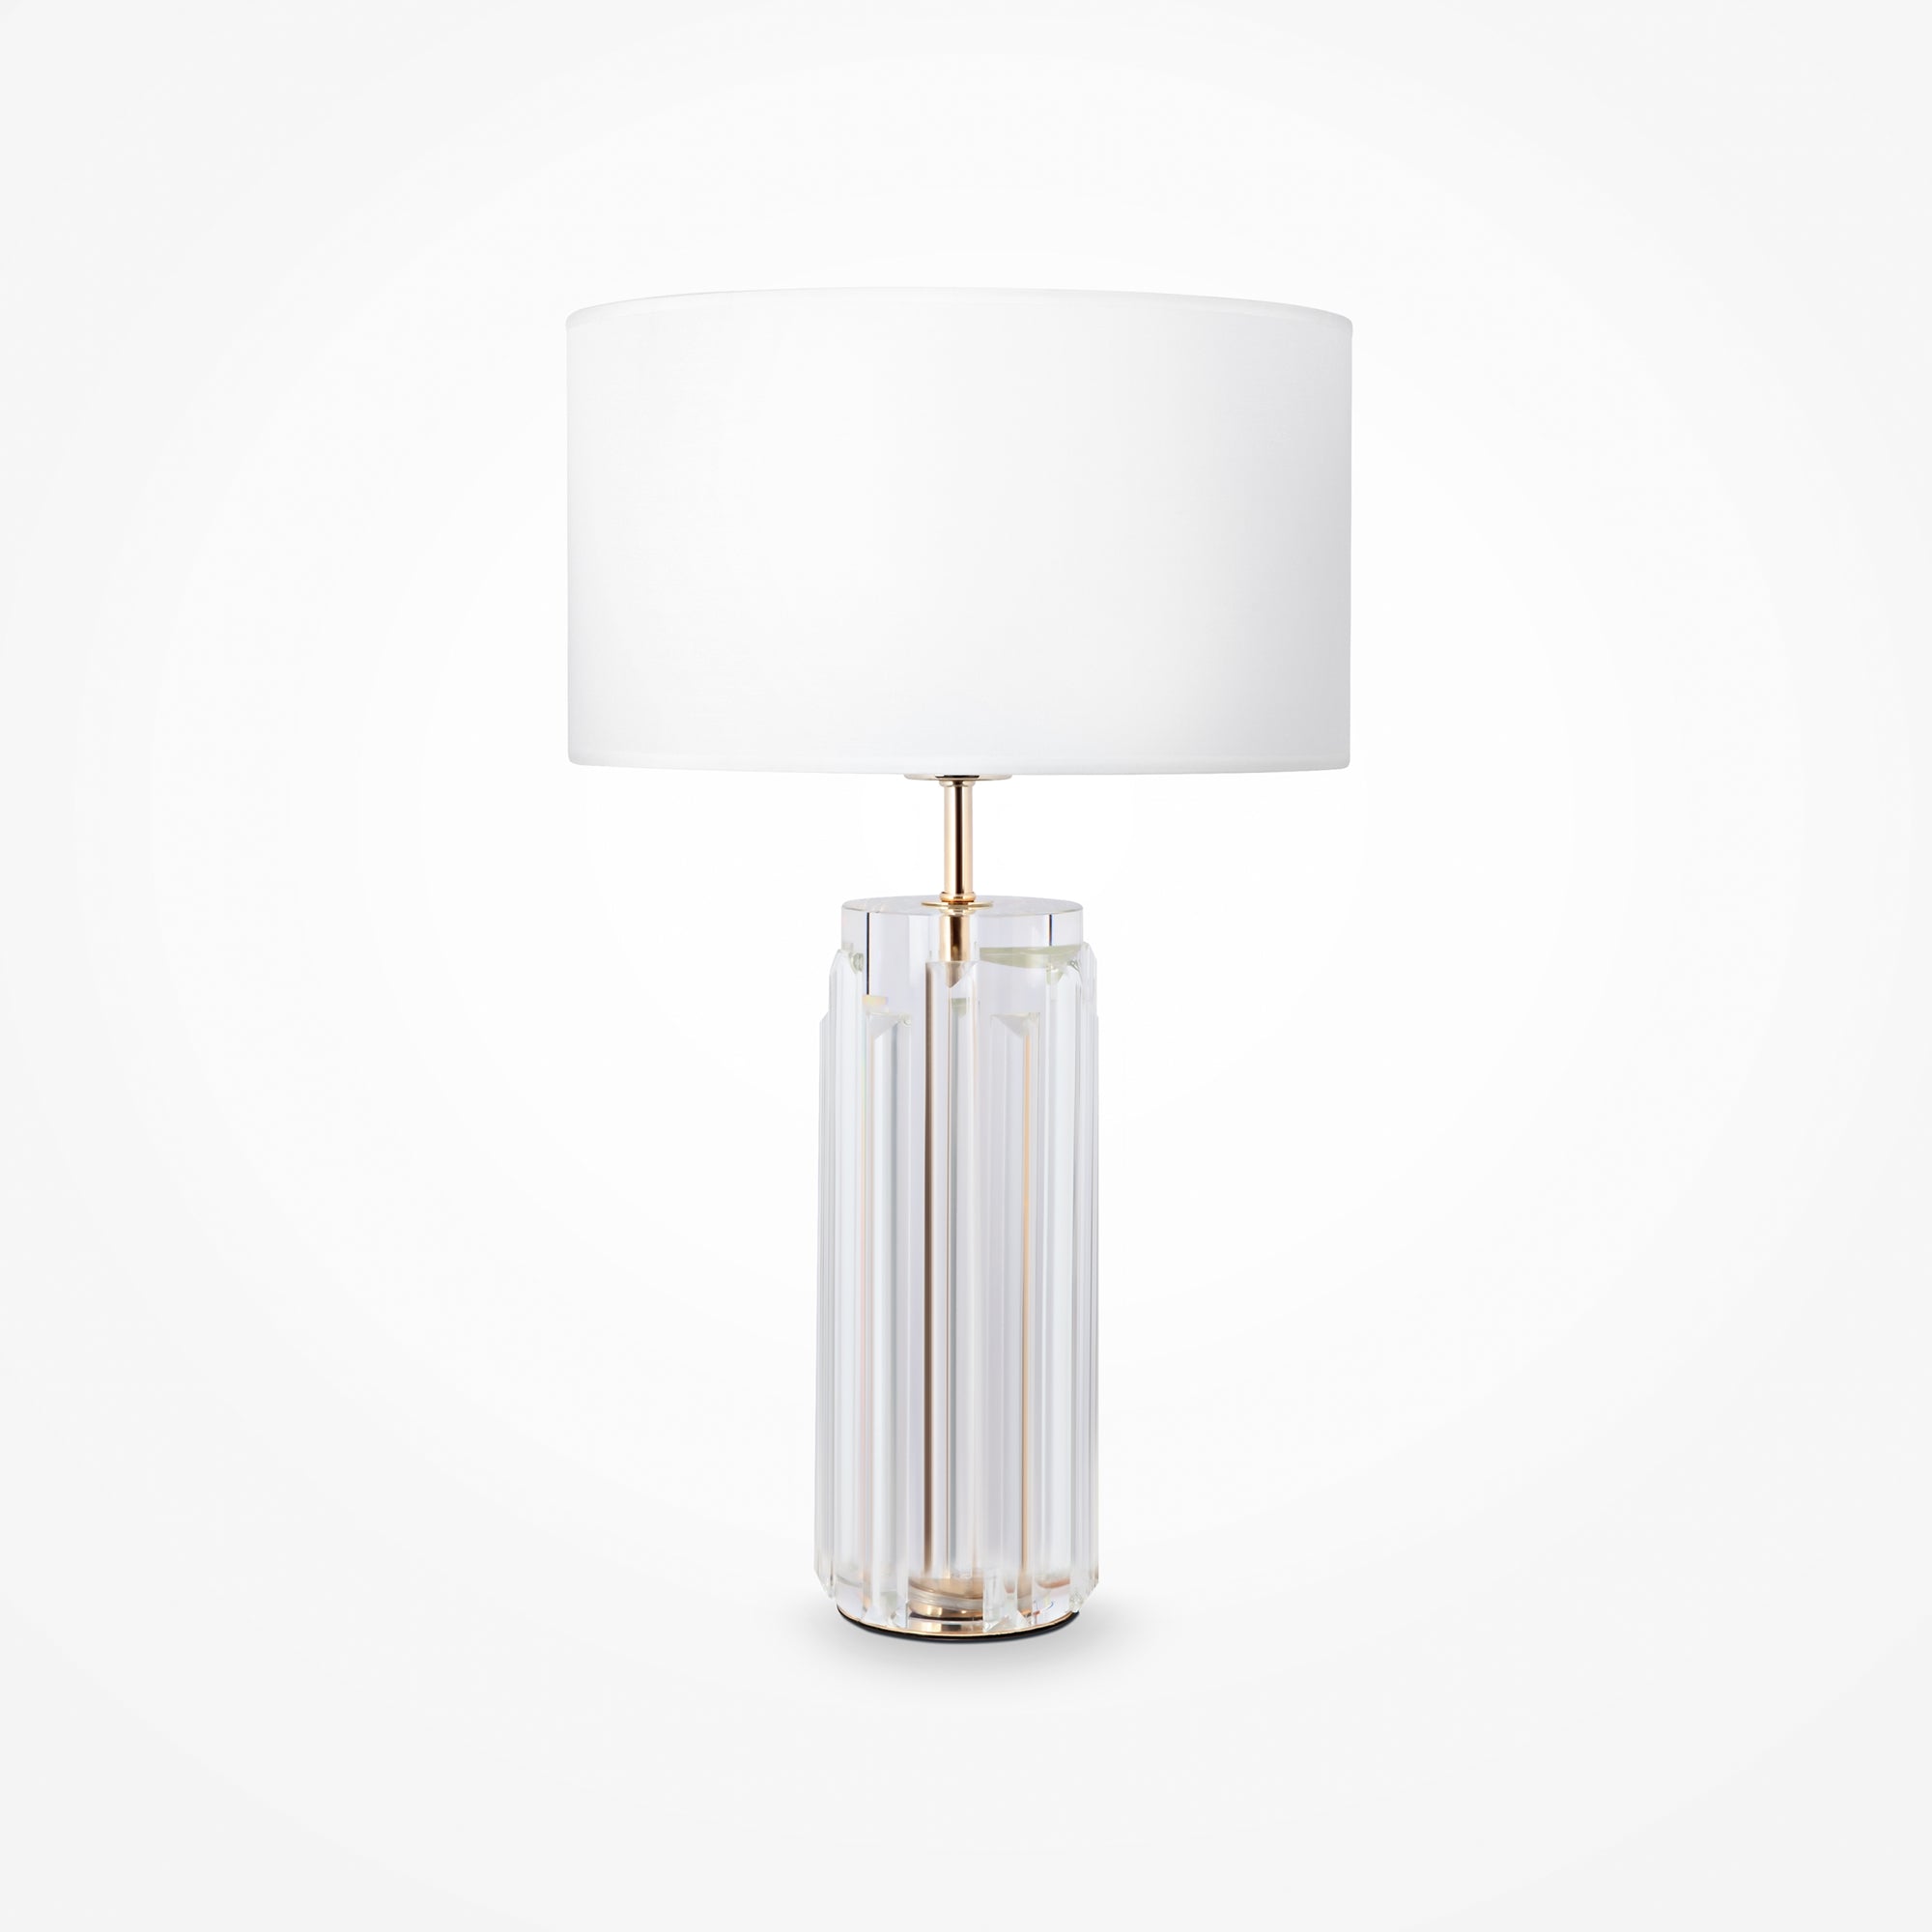 Muse Table Lamp - Chrome/Gold/Grey Finish